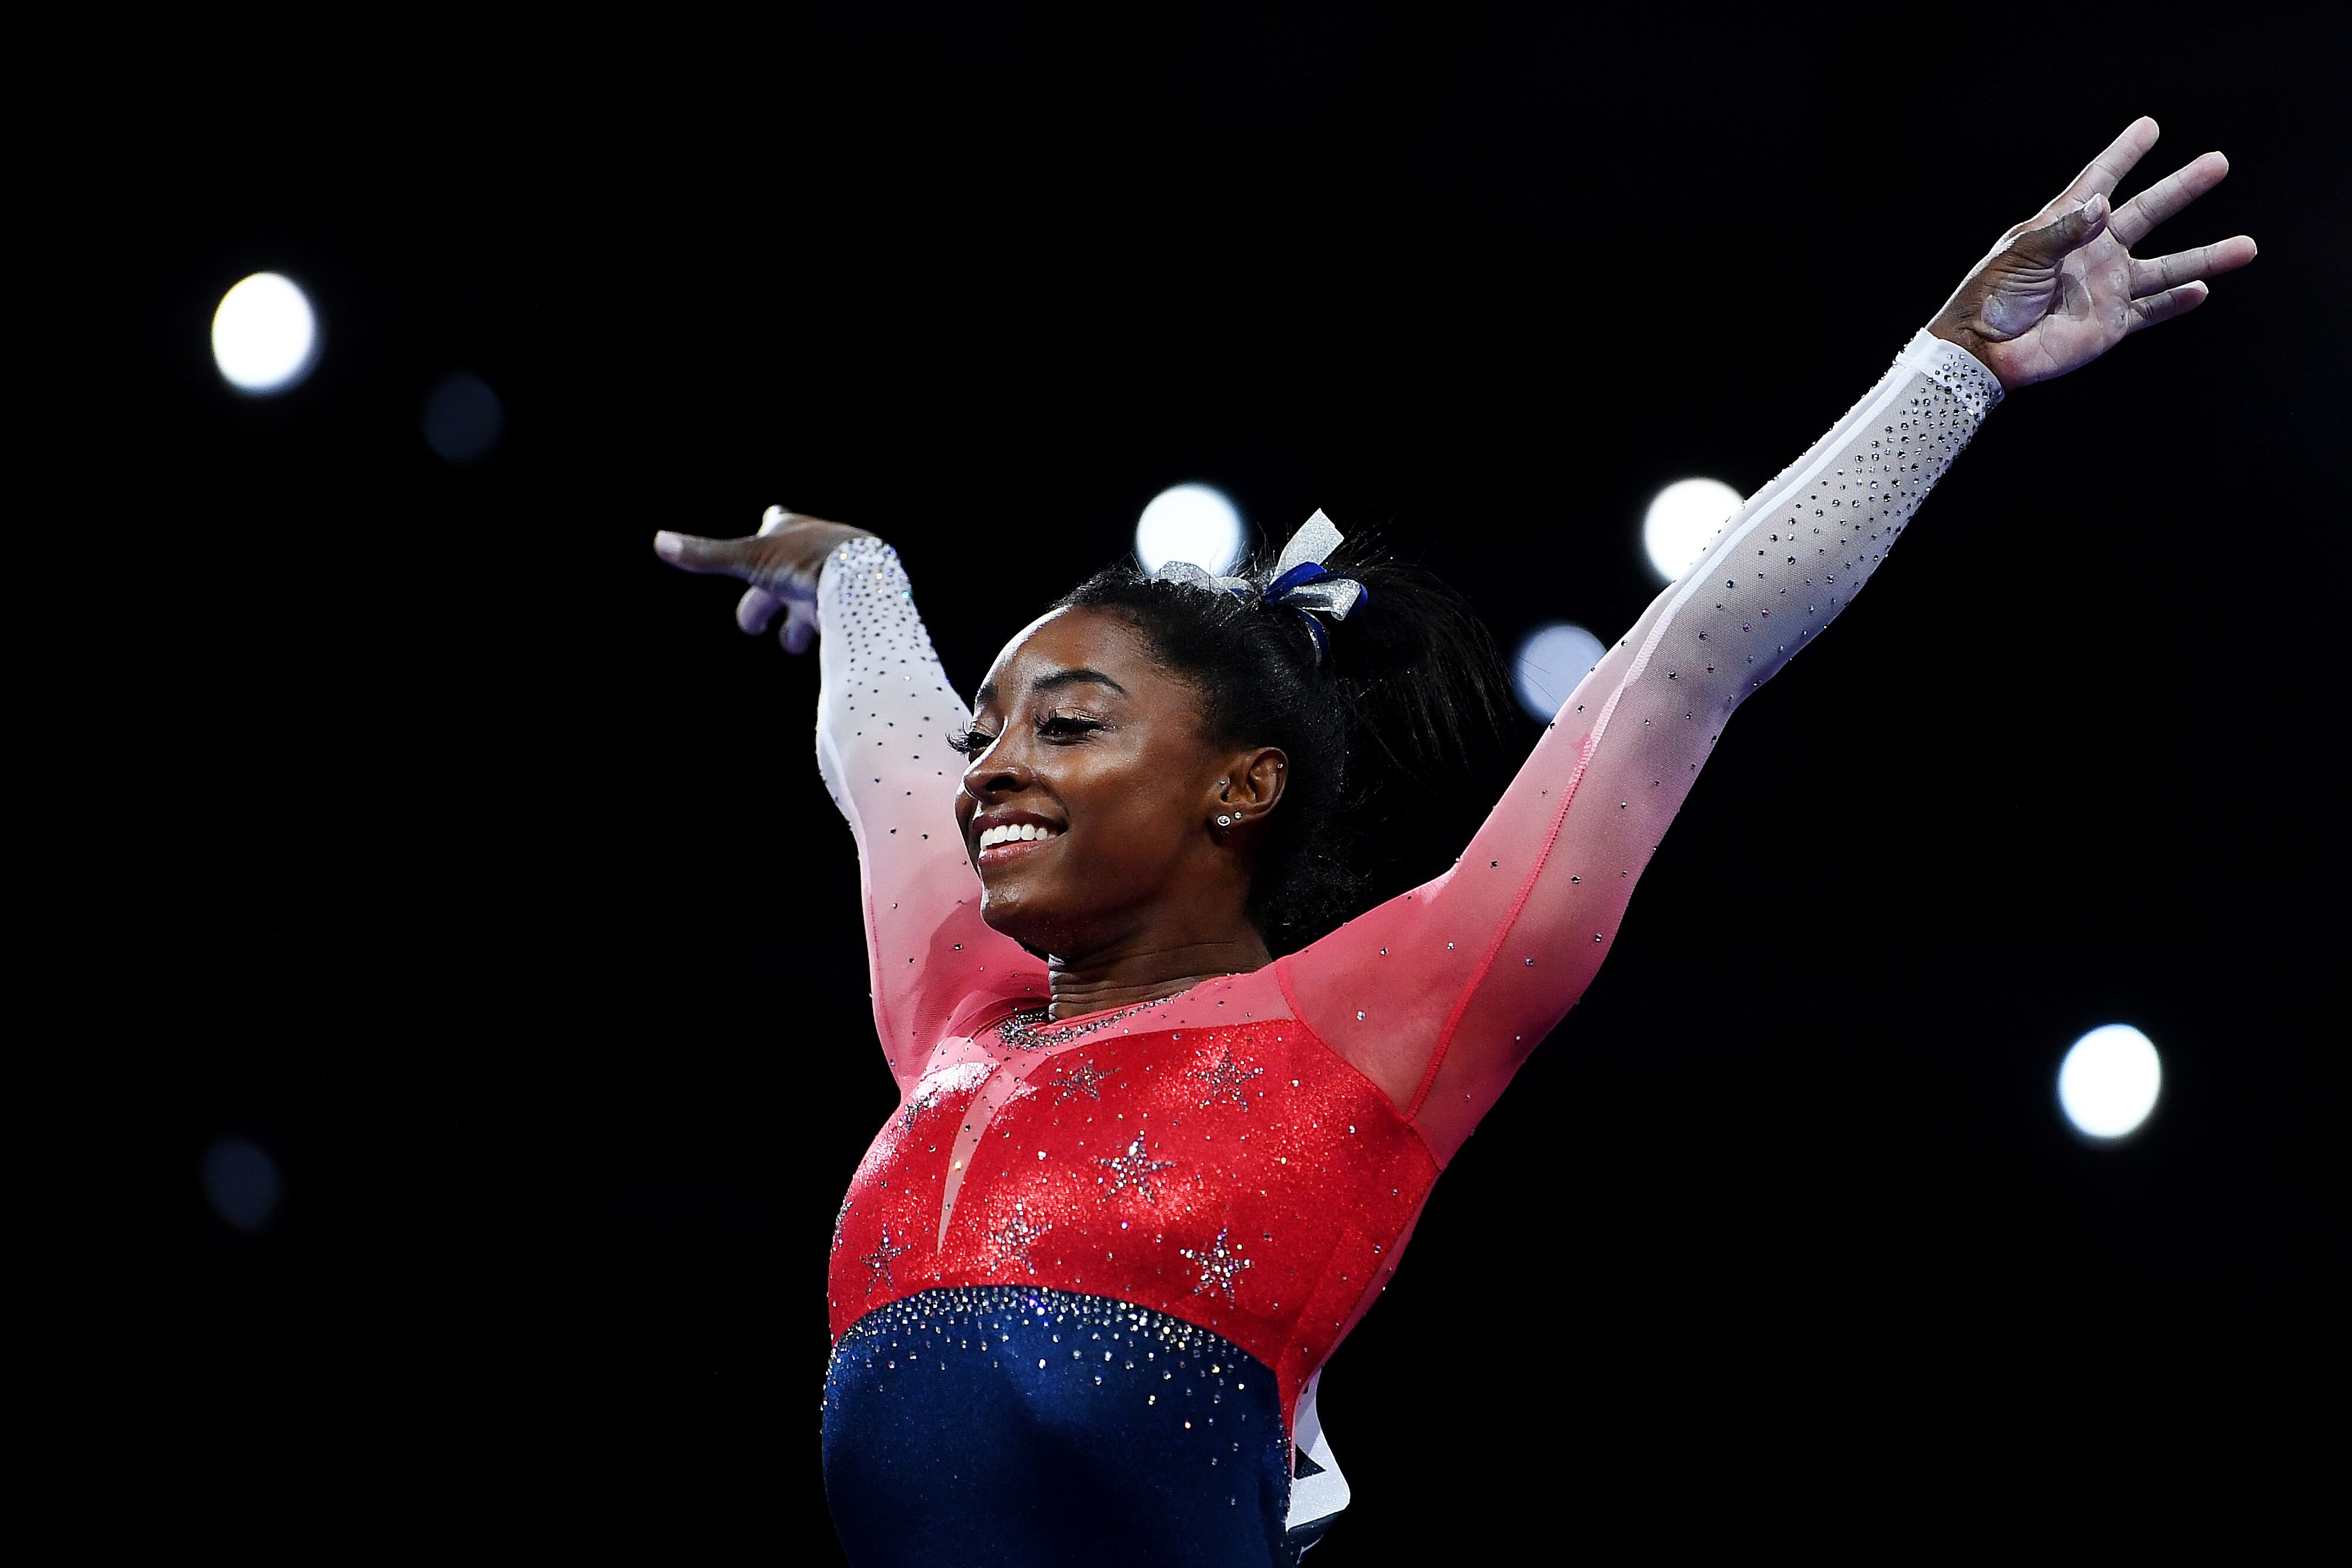 Simone Biles during the FIG Artistic Gymnastics World Championships on Oct. 08, 2019 in Germany | Photo: Getty Images